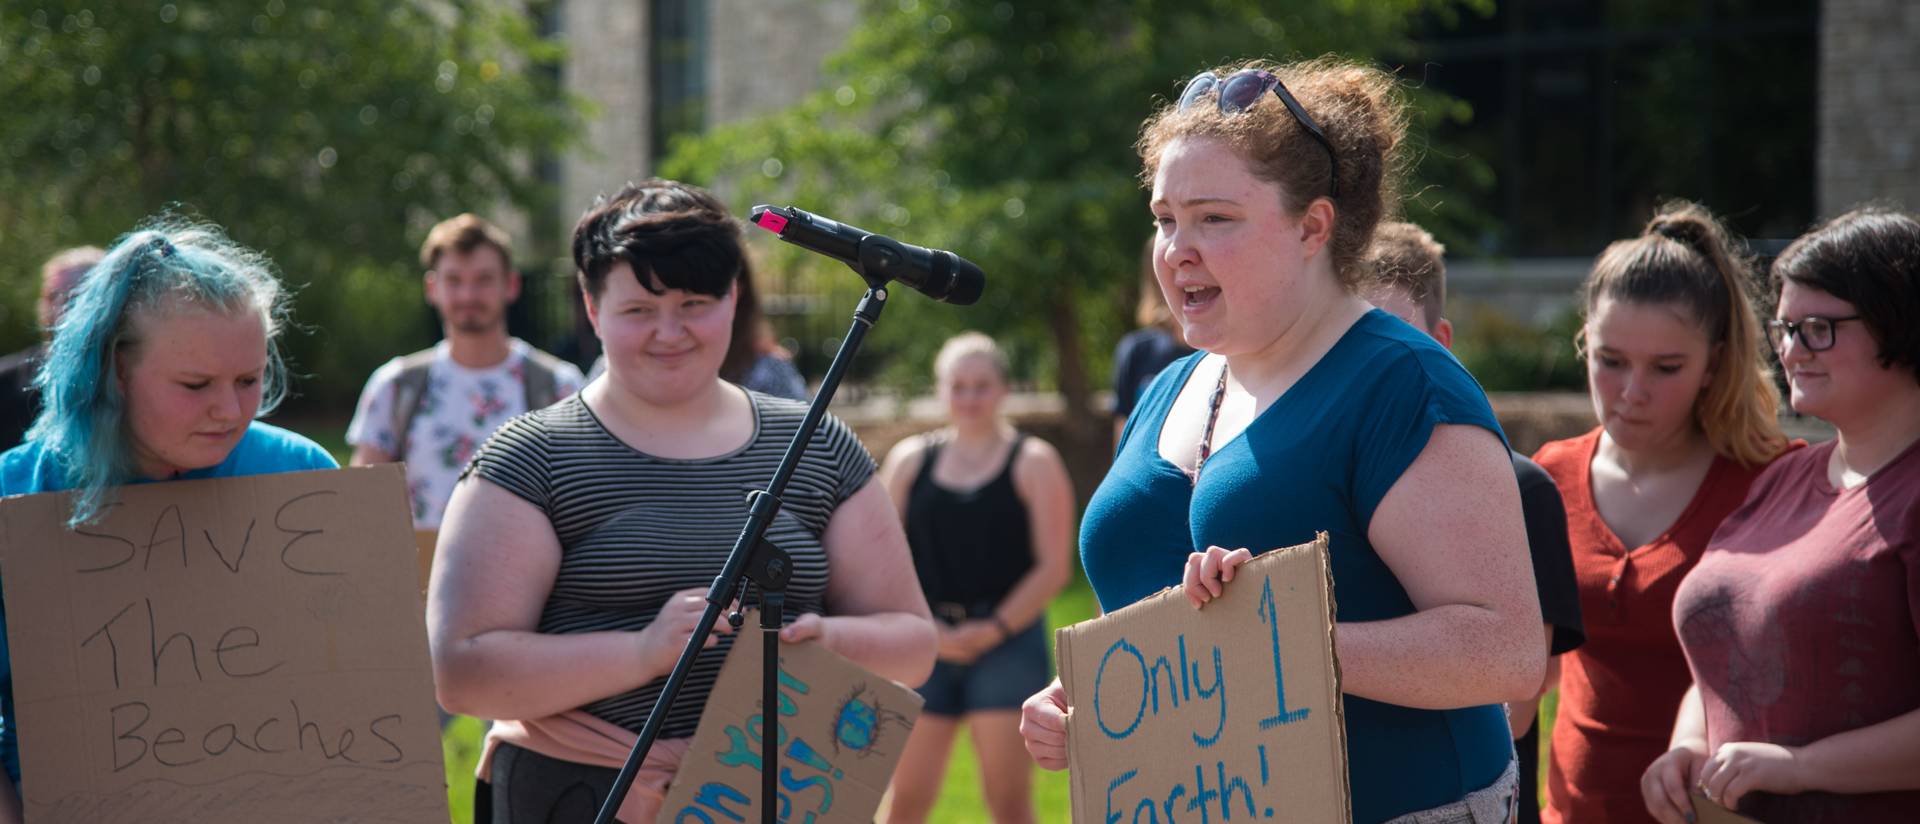 A Student holds a cardboard sign which reads "only 1 earth! Keep it safe!" while speaking into a microphone.